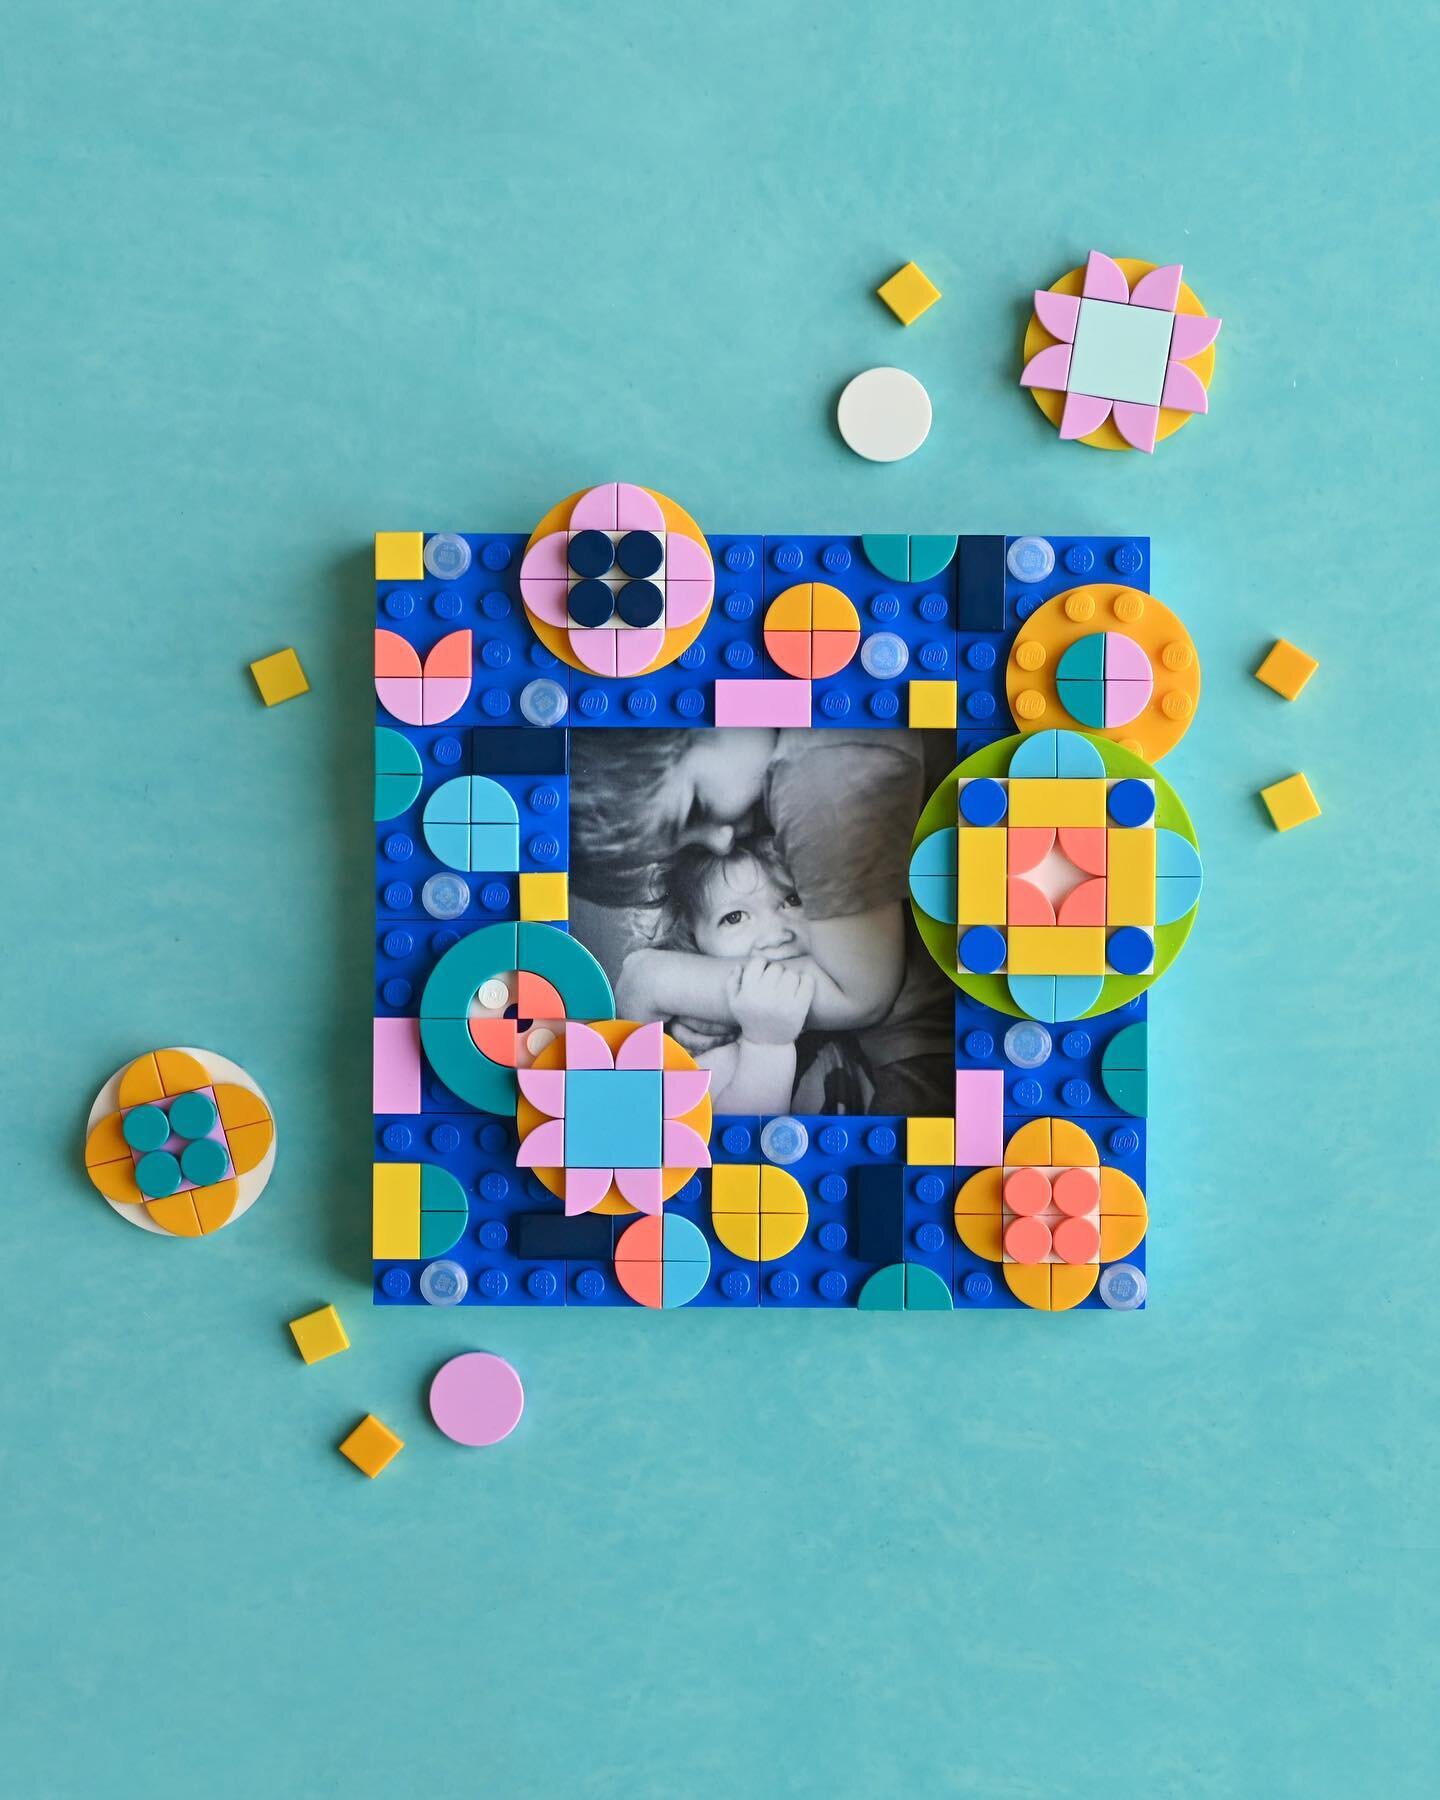 DOTTY MAY Photo Frame - I created this frame three years ago with @lego and Lego DOTS. The design has inspired me in many ways, from surface design patterns and quilts and other projects, which I will share in the next couple of weeks!

I call my col